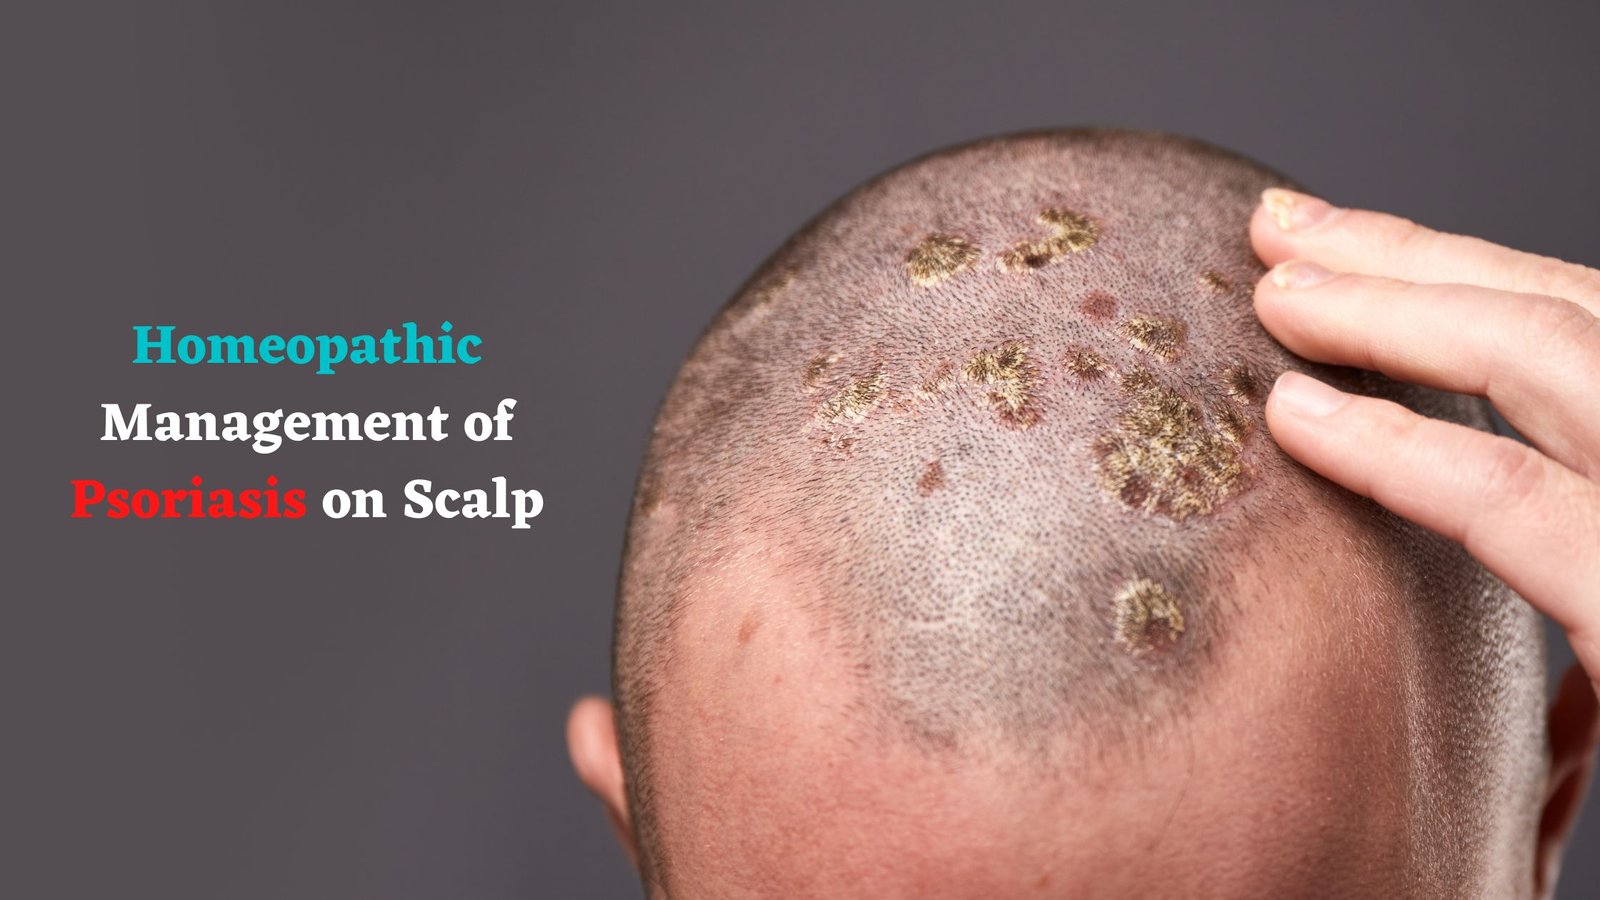 Homeopathic Management of Psoriasis on Scalp